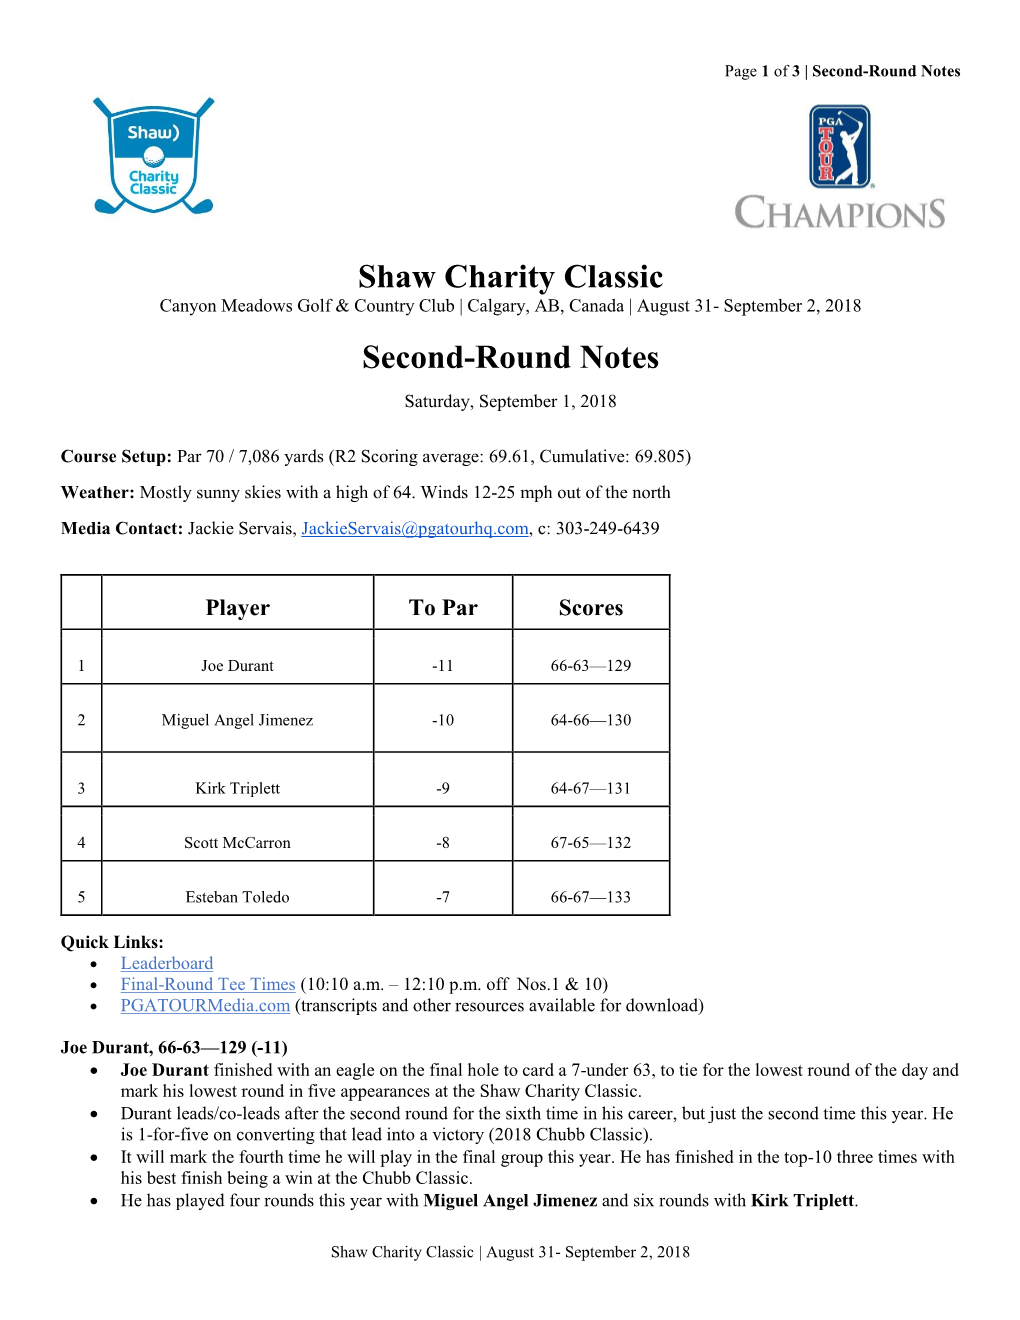 Shaw Charity Classic Second-Round Notes